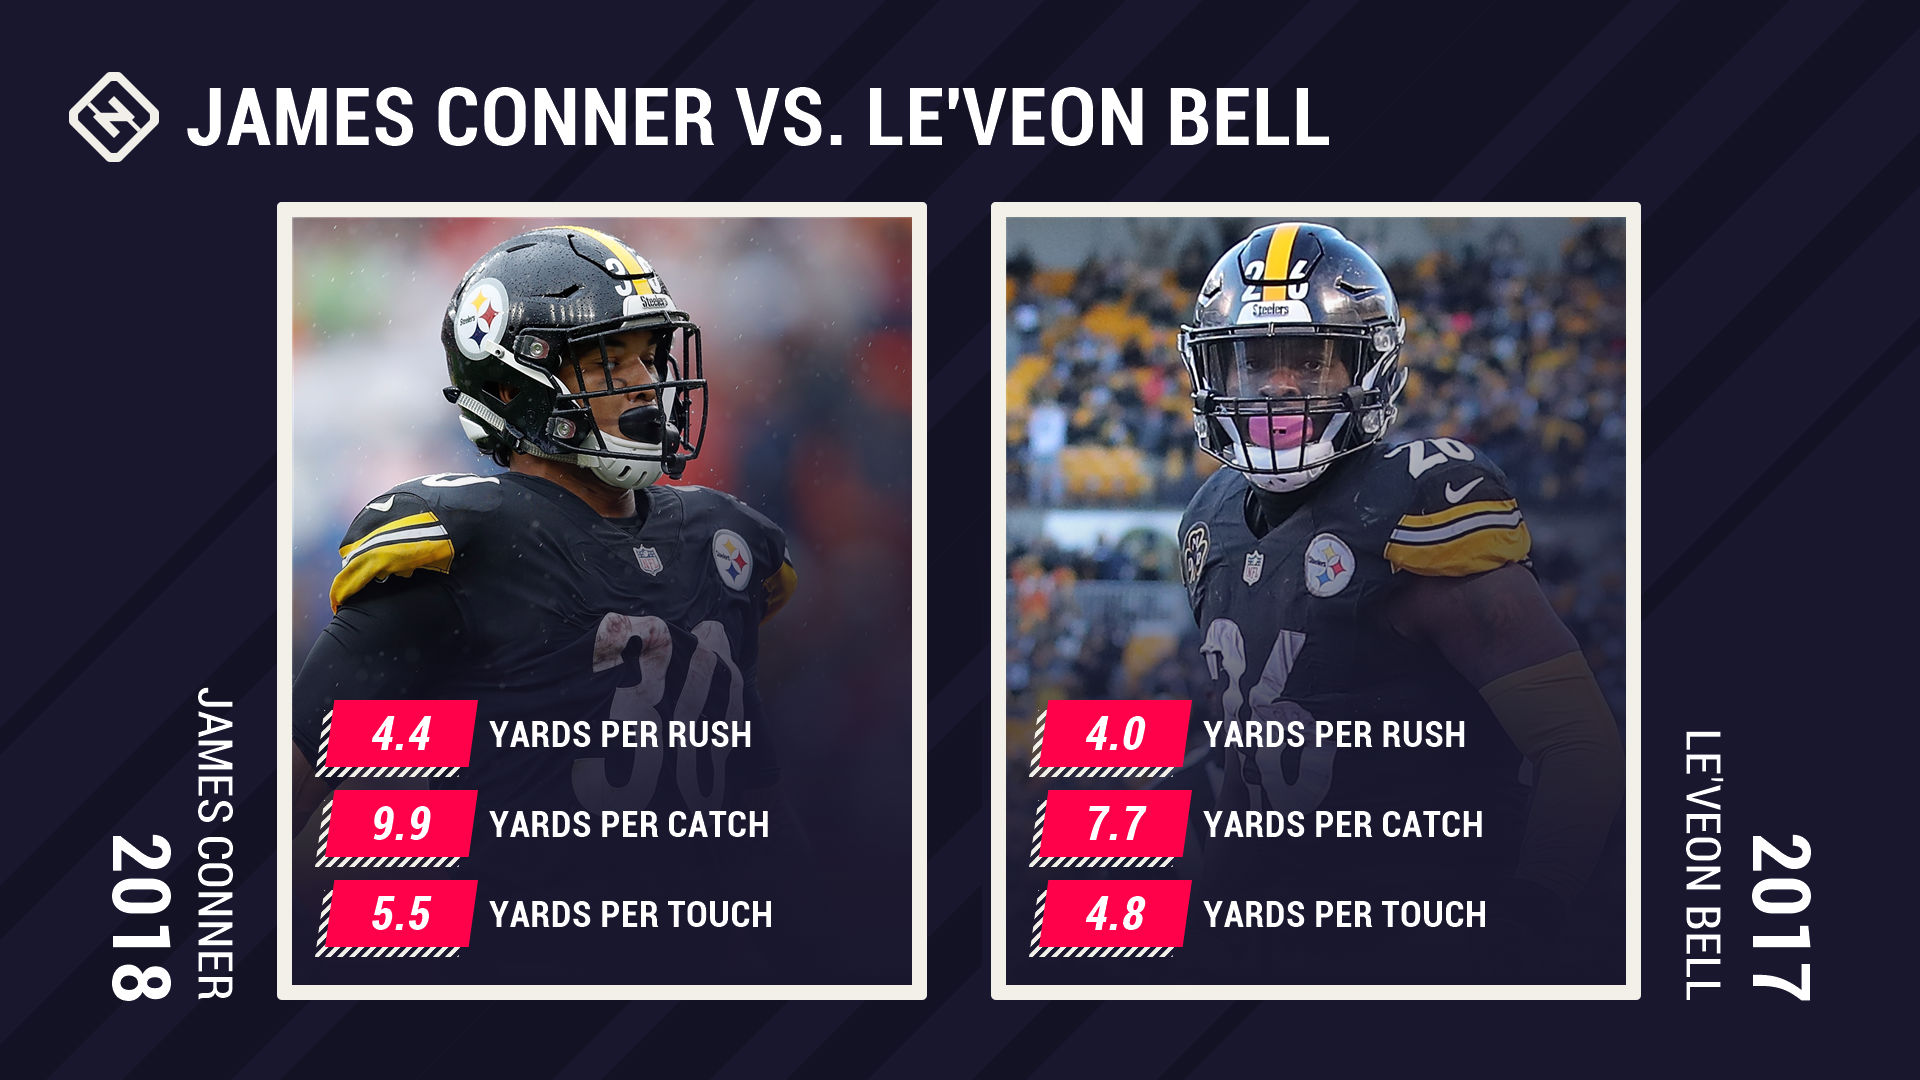 conner-bell-stats-101818-getty_dgia1vbem